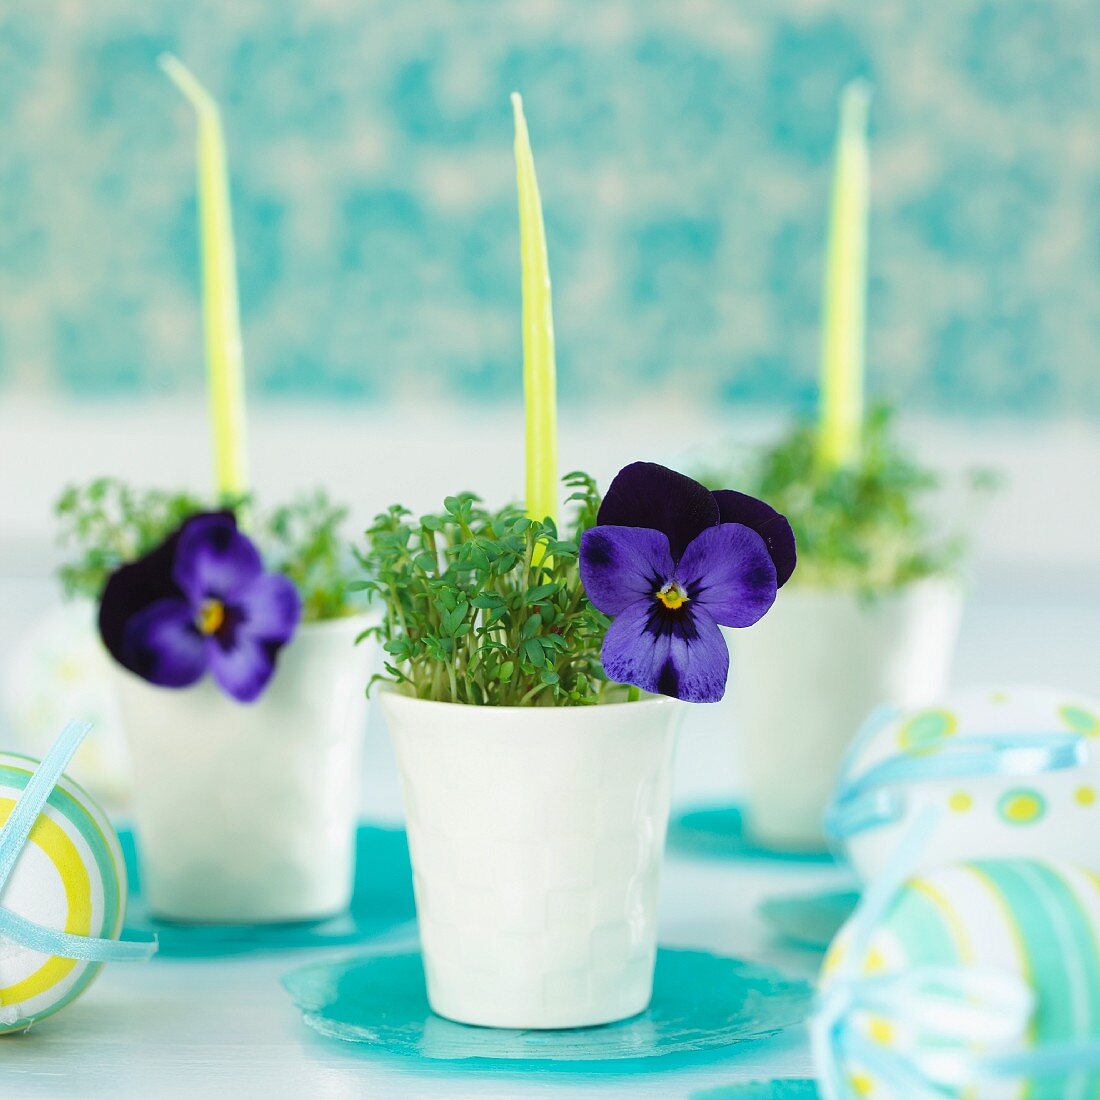 Egg cups planted with cress and decorated with candles and viola flowers